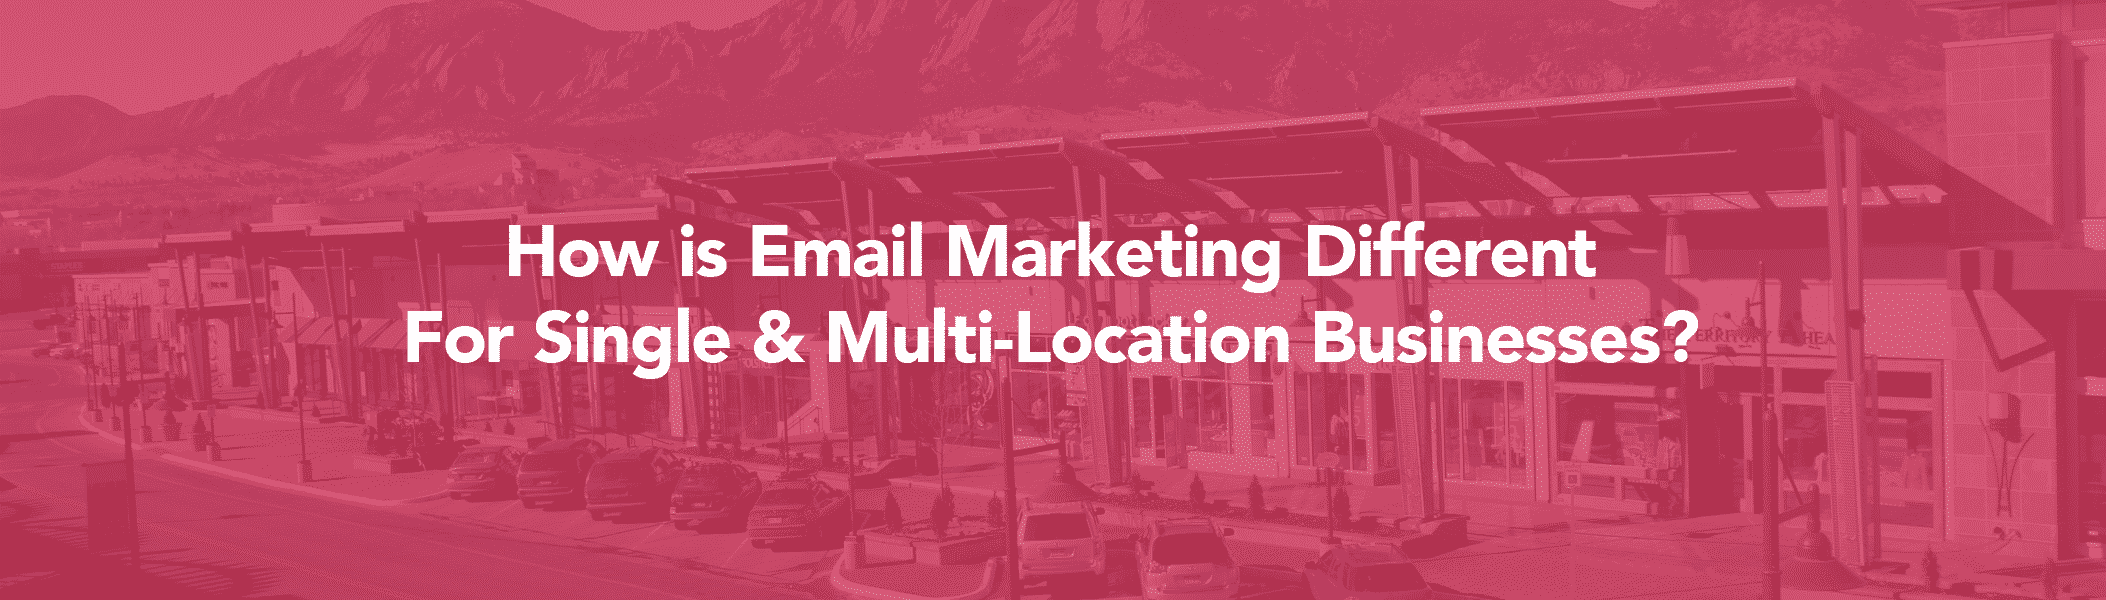 email marketing for multi-location businesses